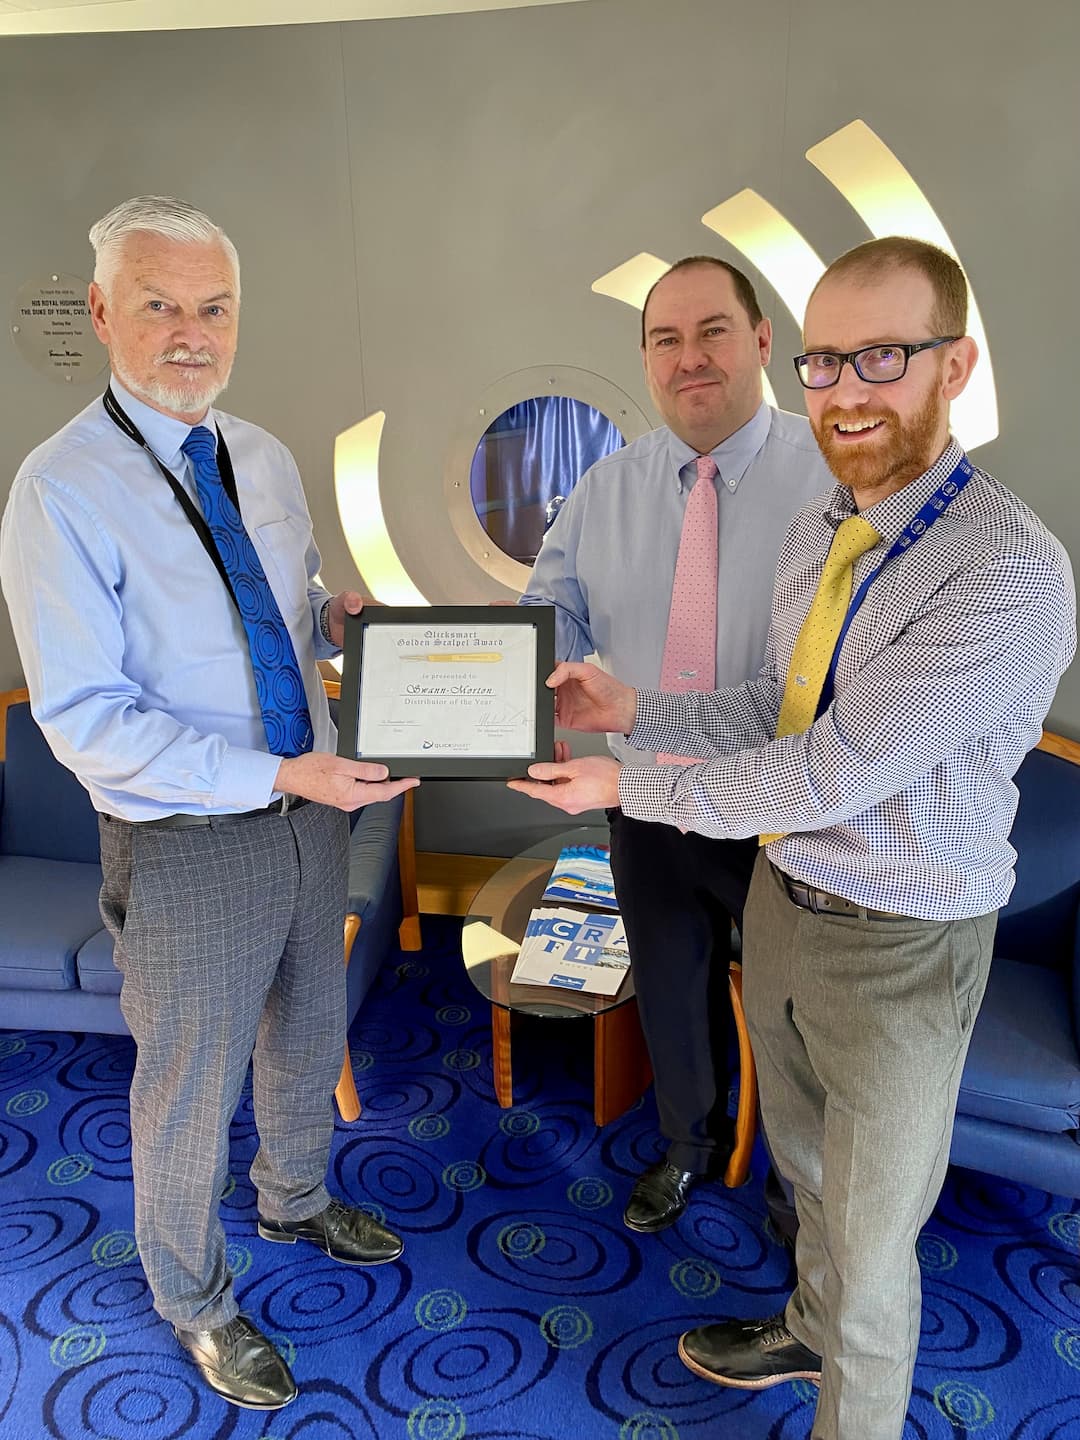 Swann-Morton’s now retired Sales & Marketing Director, Chris Taylor proudly presents Qlicksmart’s Golden Scalpel Award to the new Sales Director, Tom Caley and Customer Support Manager, Adrian Glossop as winners who have driven the UK initiatives.